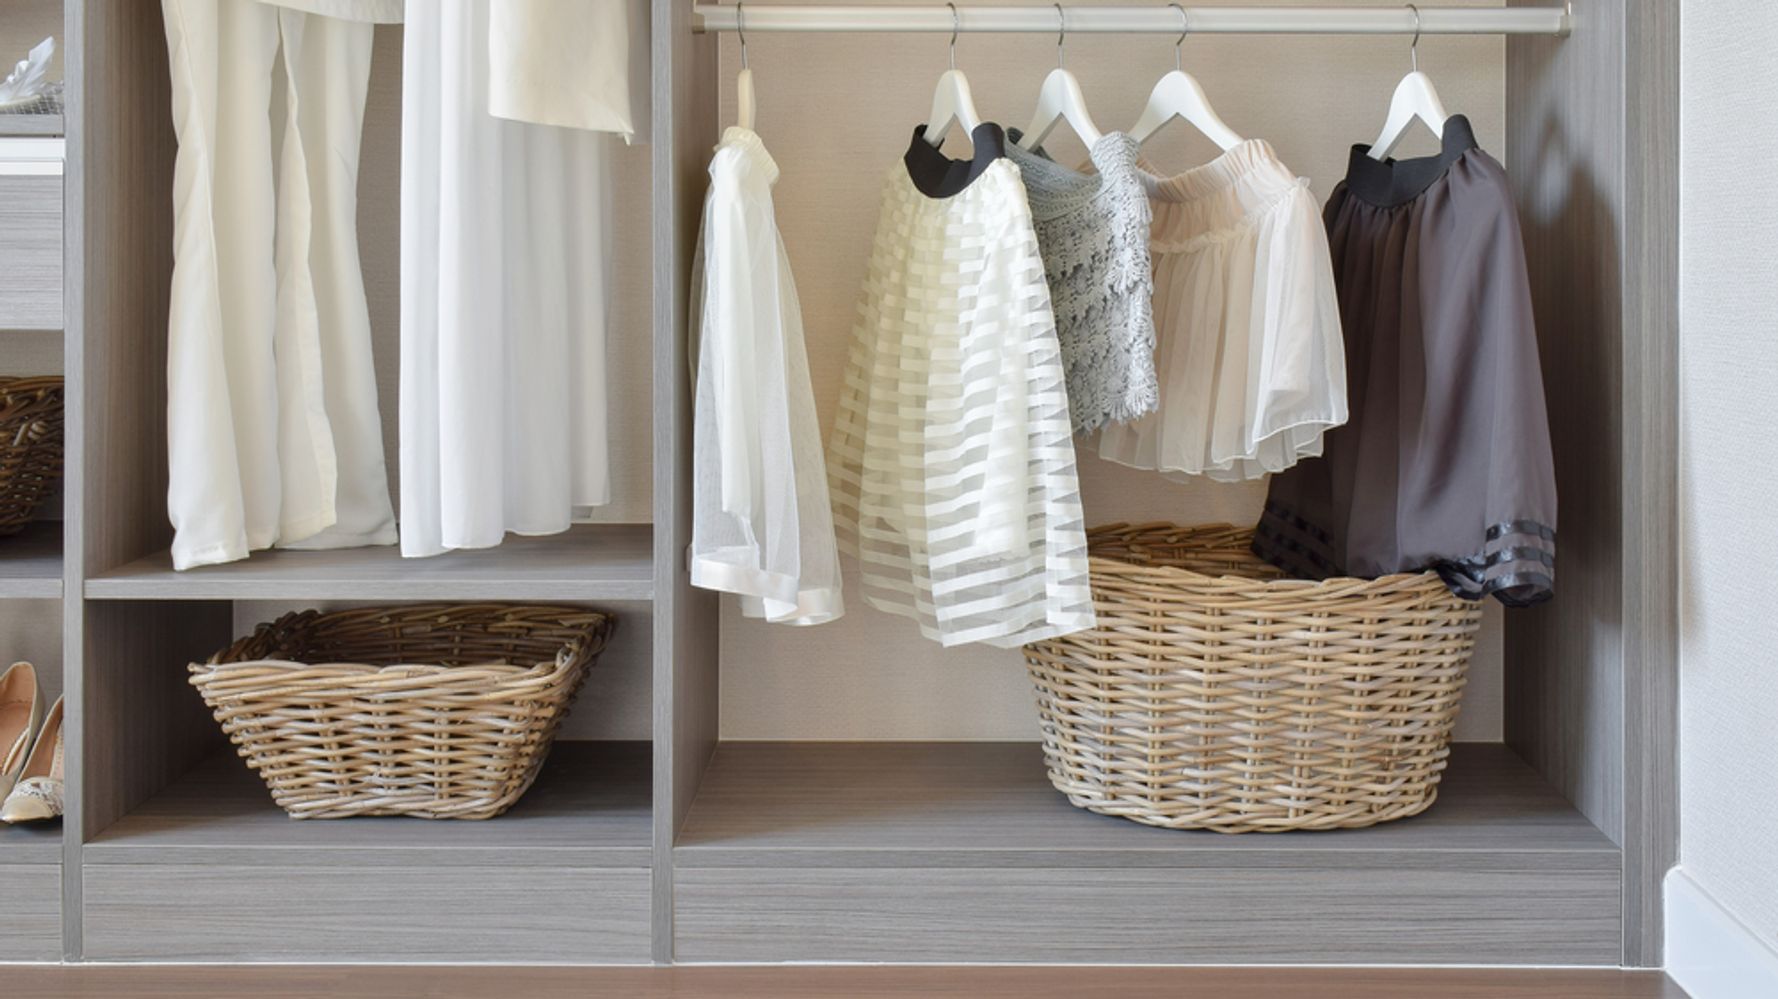 Creating A Capsule Wardrobe In 7 Easy Steps | HuffPost Life